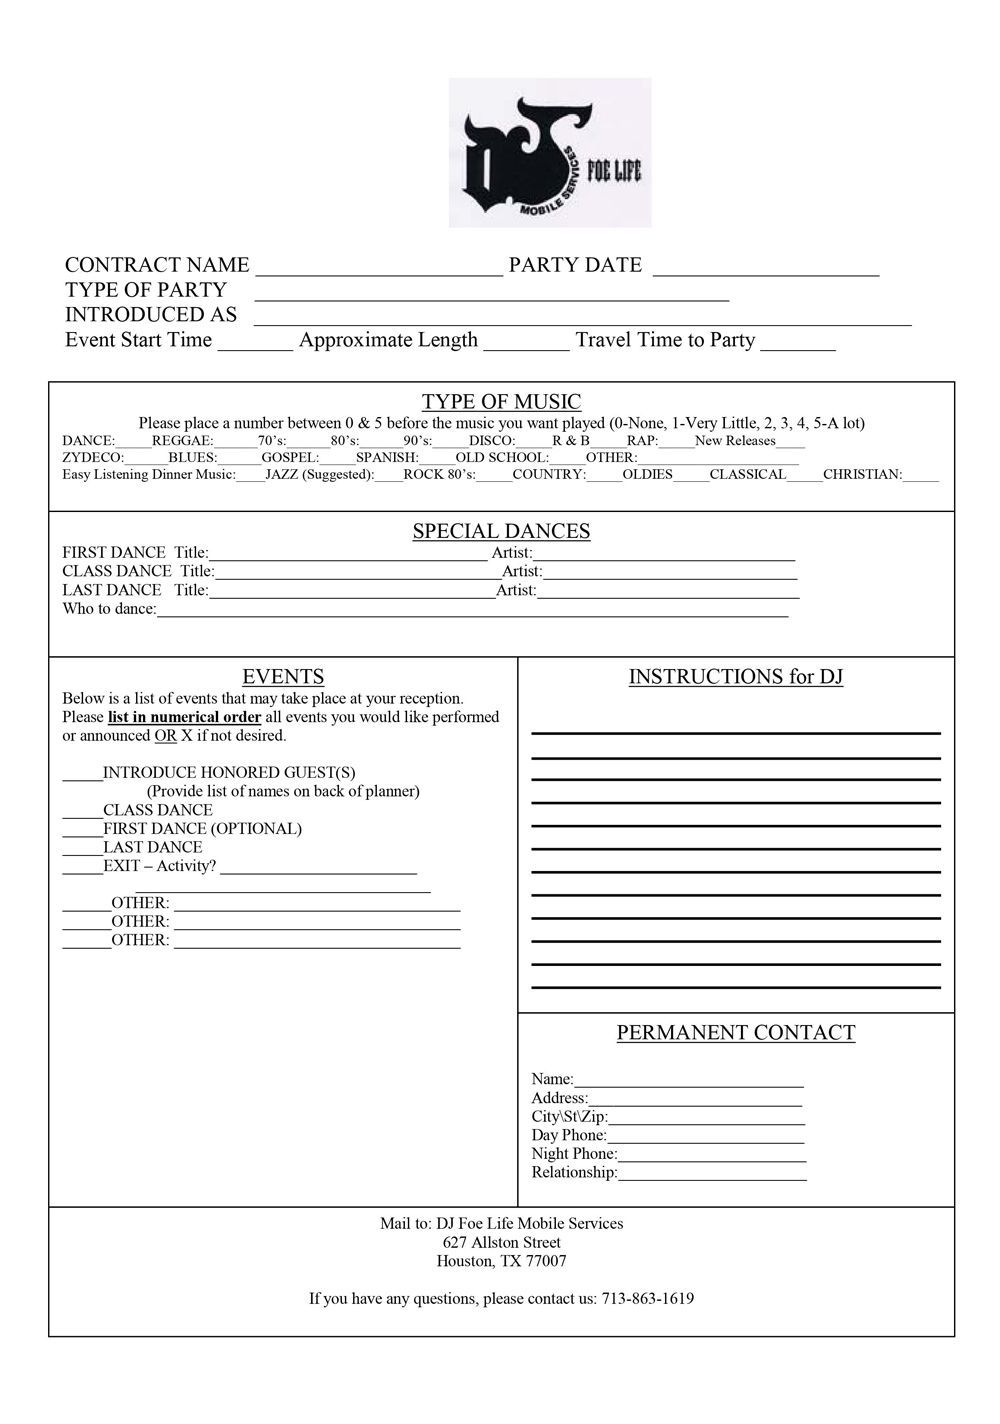 Booking Form For Your Next Party